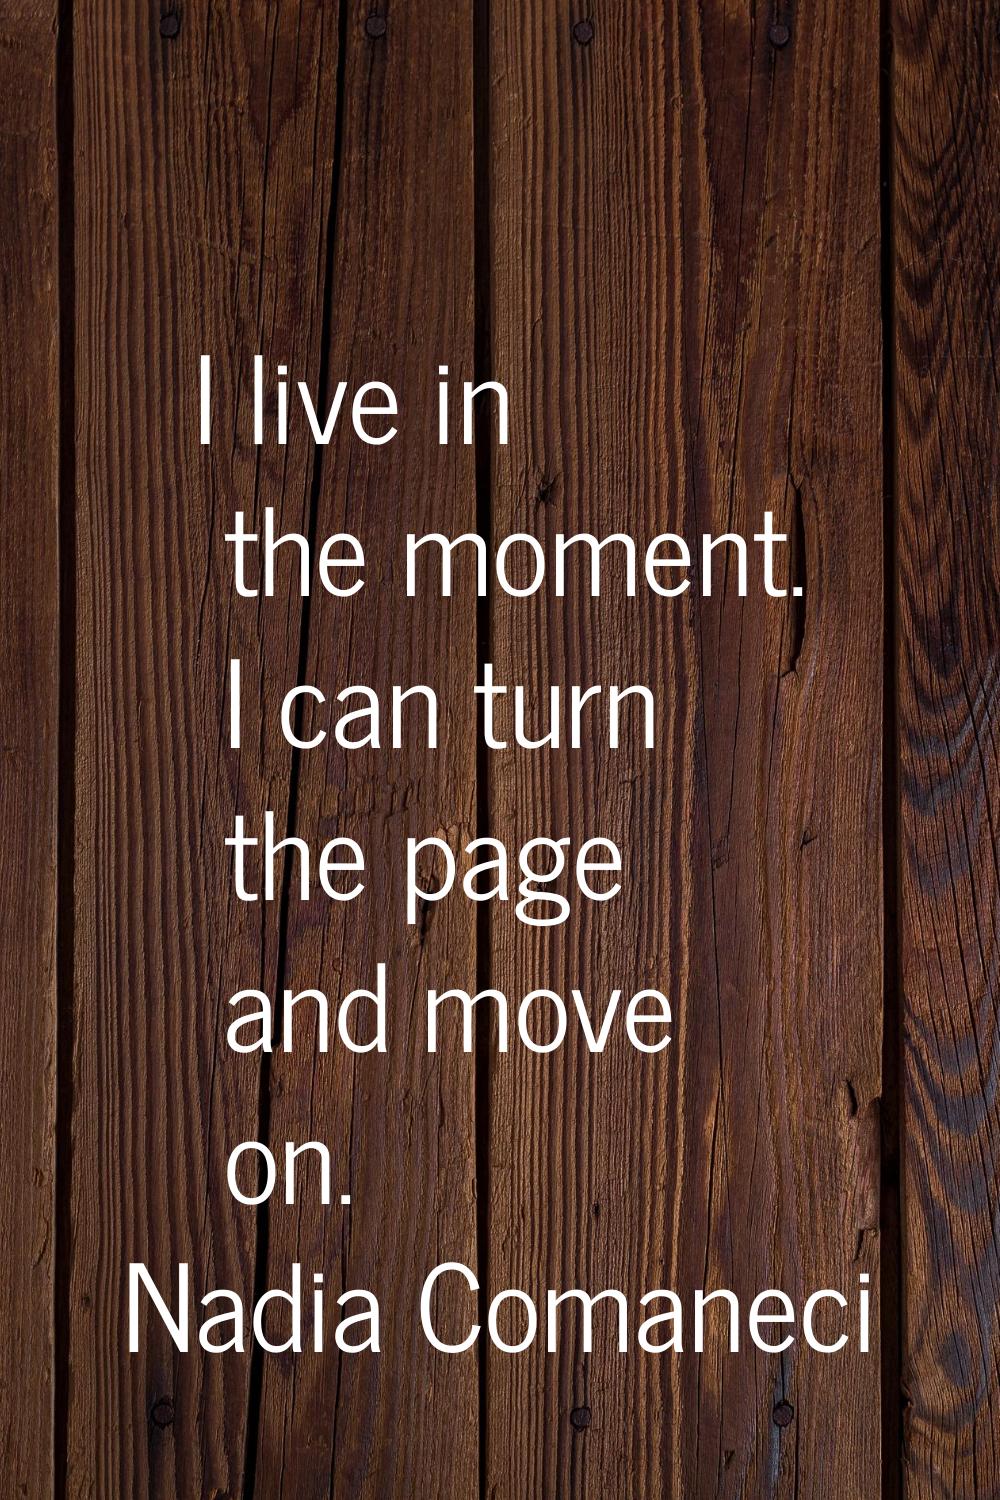 I live in the moment. I can turn the page and move on.